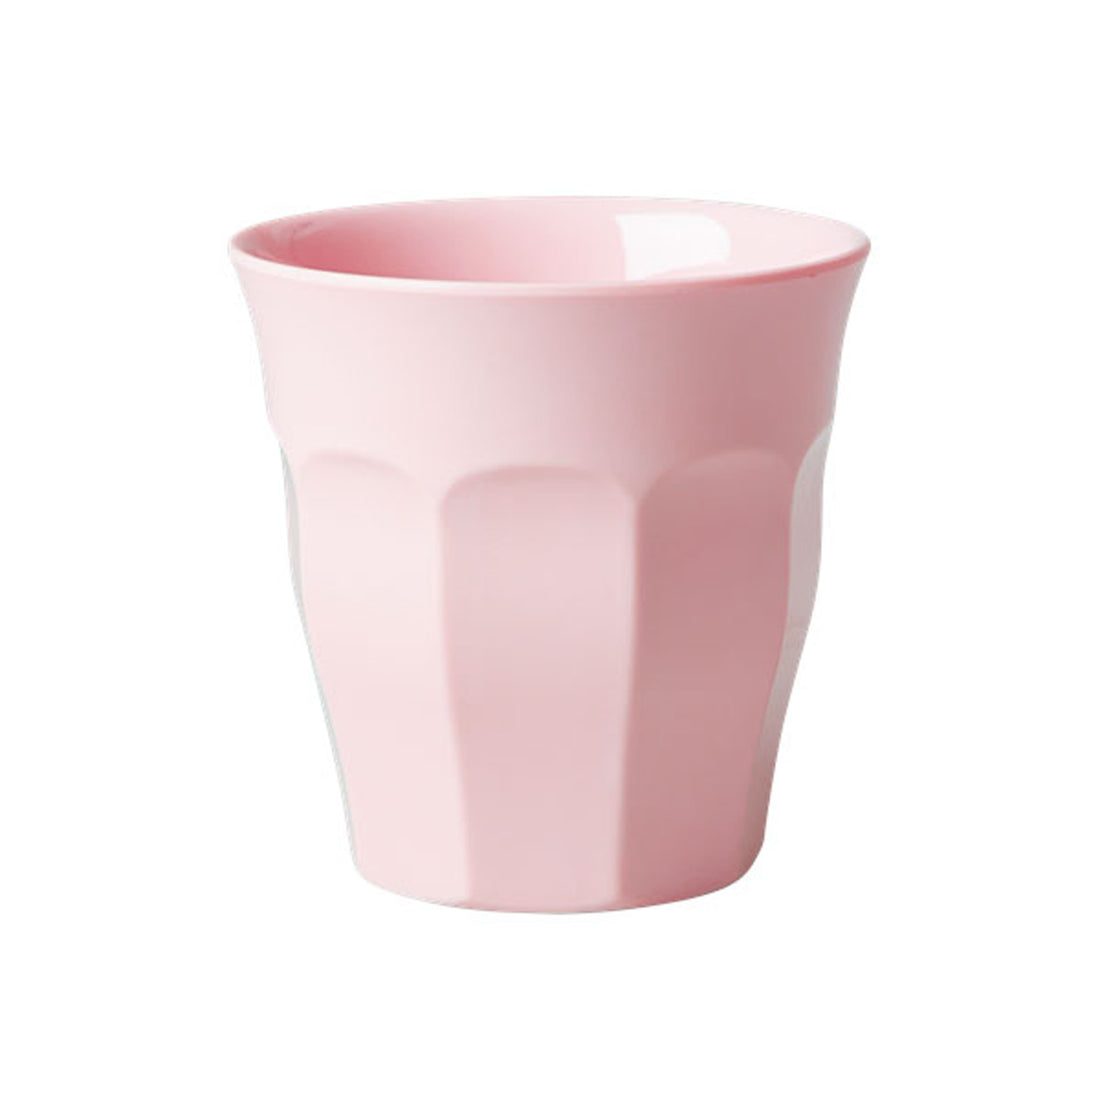 rice-dk-cup-in-soft-pink-01